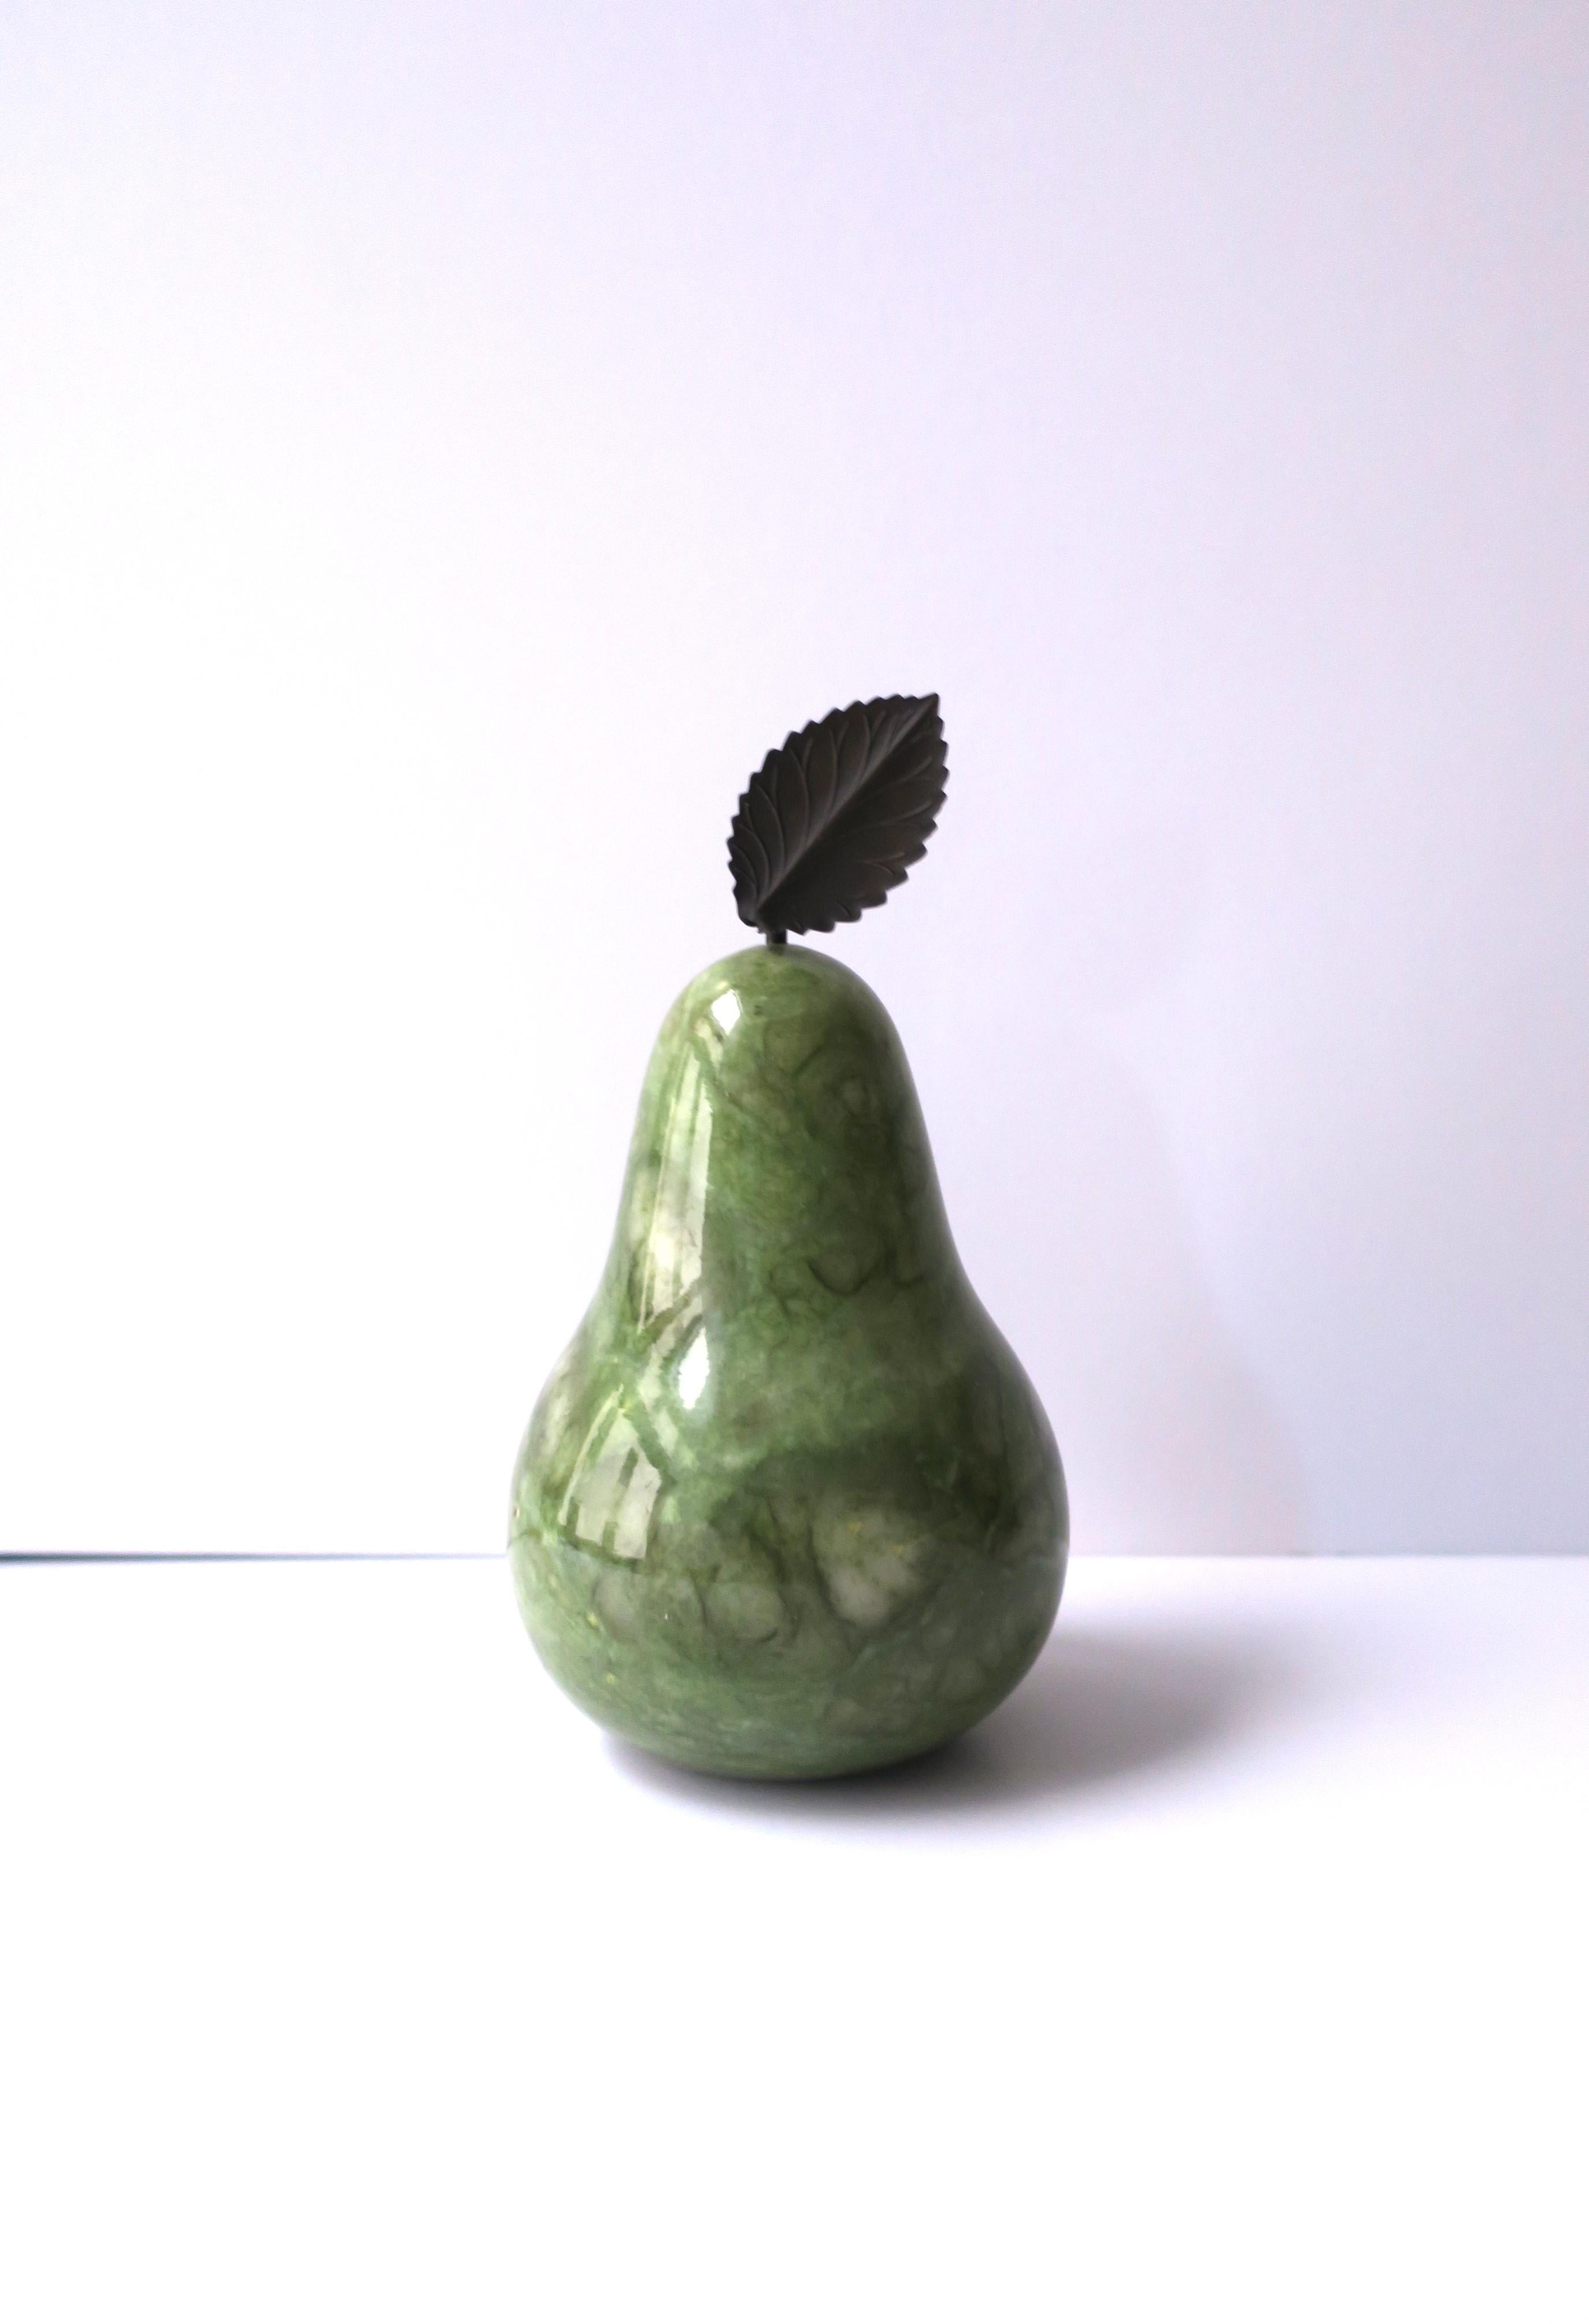 A substantial Italian green alabaster marble pear and leaf sculpture decorative object, circa late-20th century, Italy. Piece could also be used as a bookend. A great piece for a shelf, kitchen, mantle, dining table, etc. Alabaster marble pear is